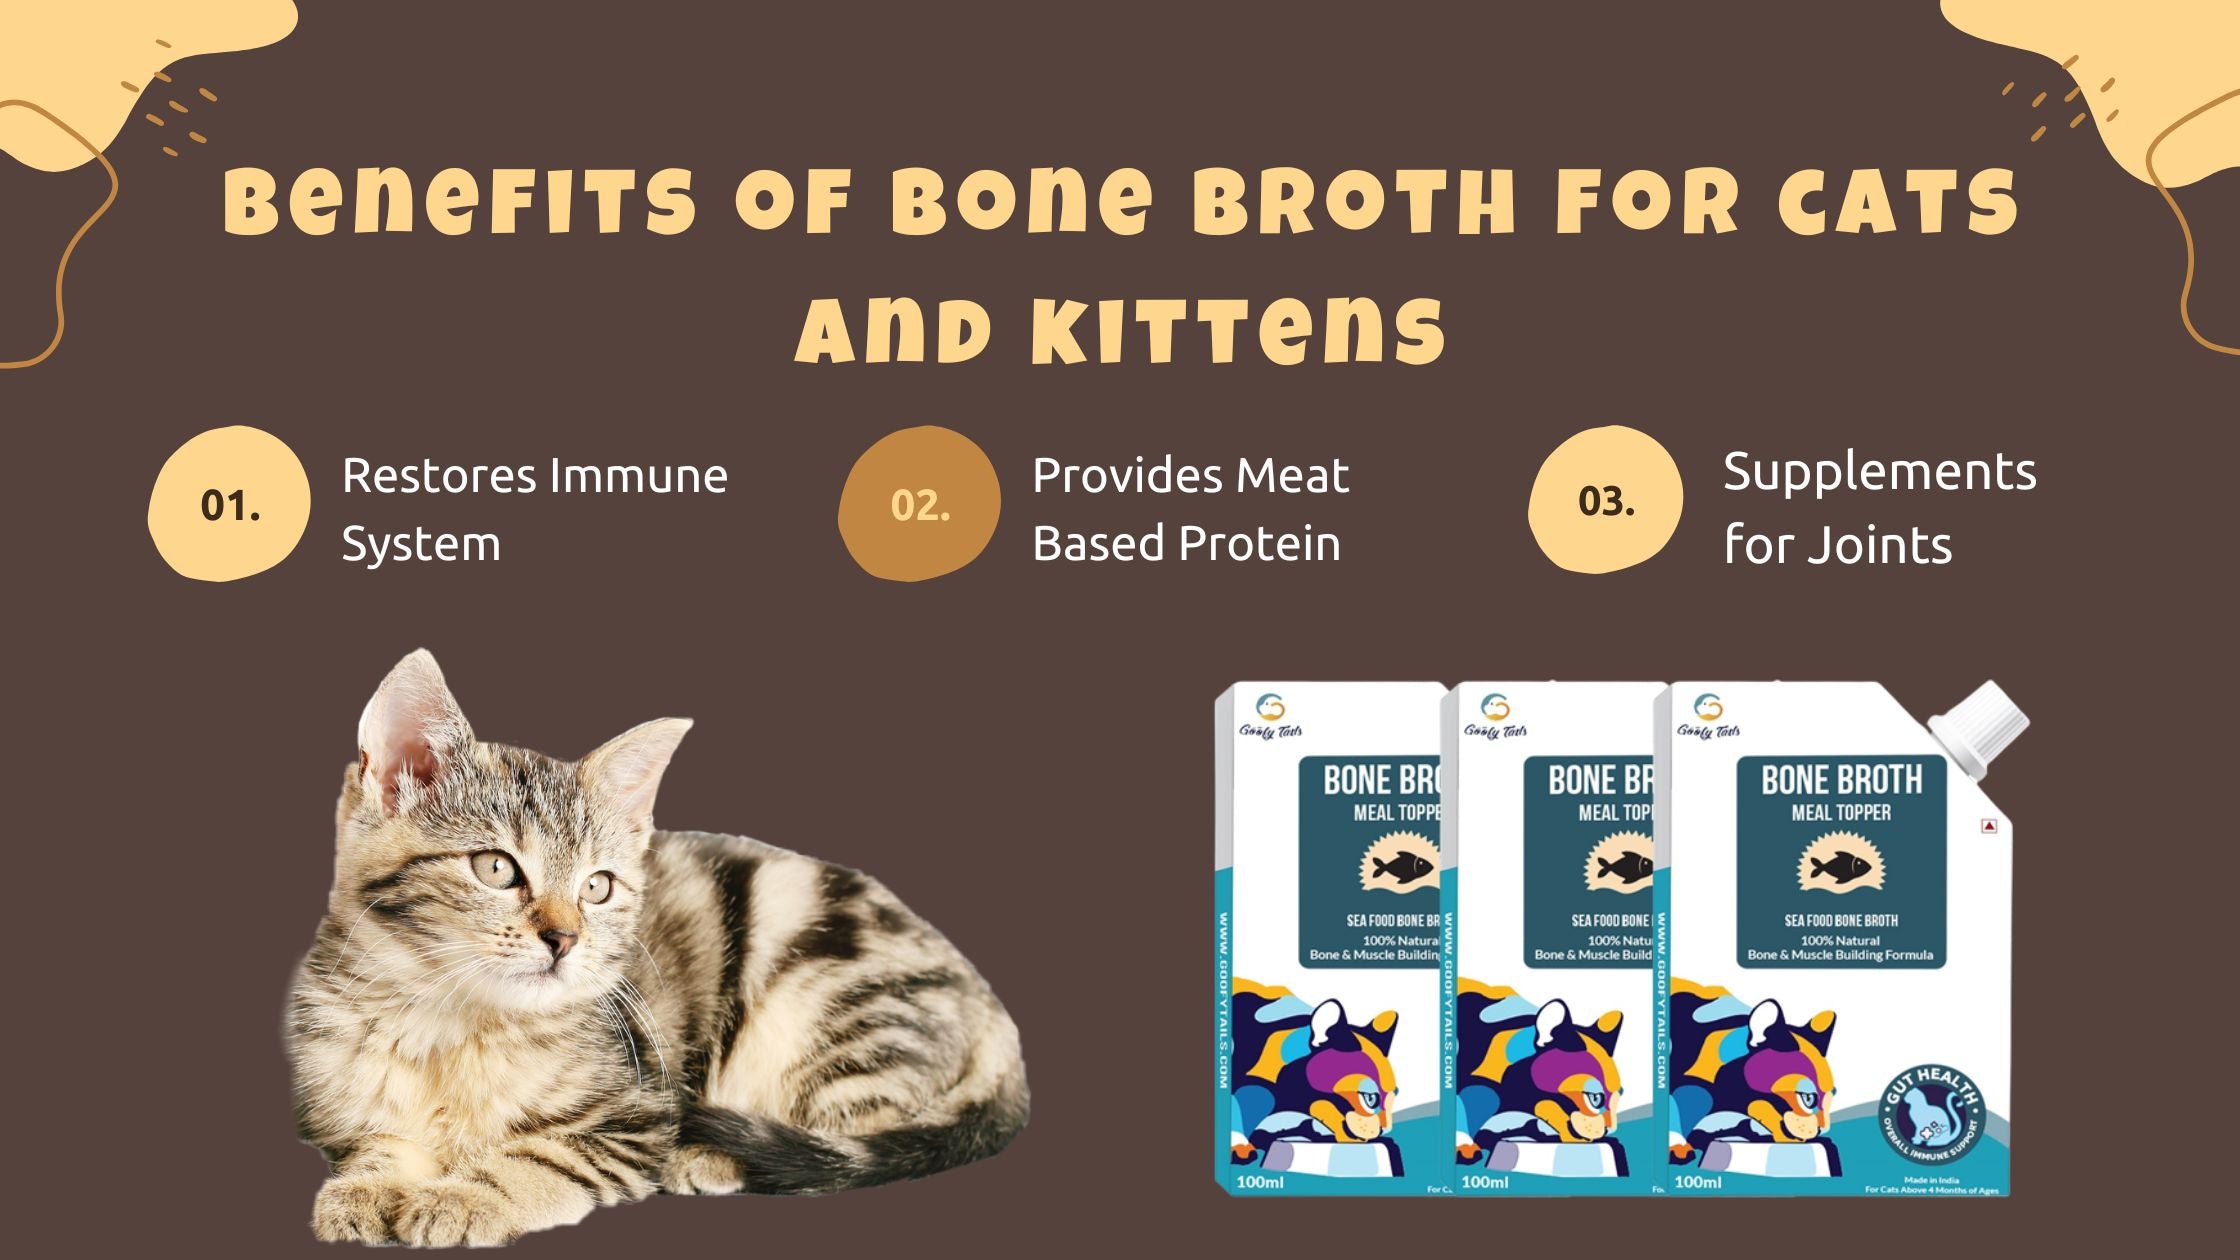 Benefits of Bone Broth for cats and kittens